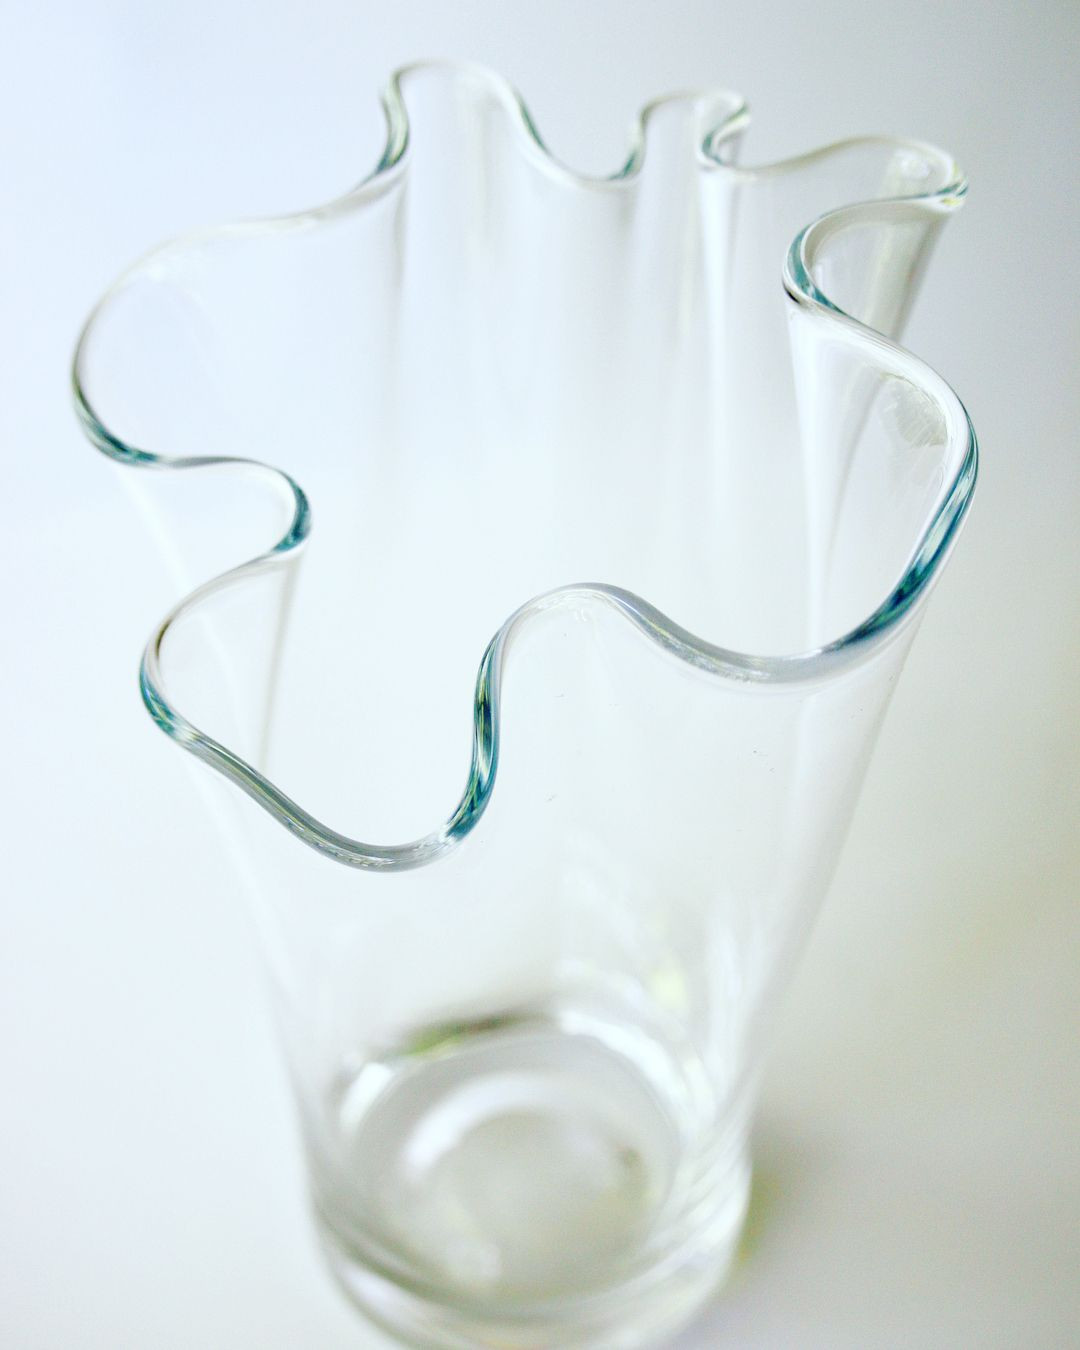 23 Lovely Tall Thick Glass Vase 2024 free download tall thick glass vase of alvar aalto esque heavy glass vase obsessed 10 tall 54 plus regarding alvar aalto esque heavy glass vase obsessed 10 tall 54